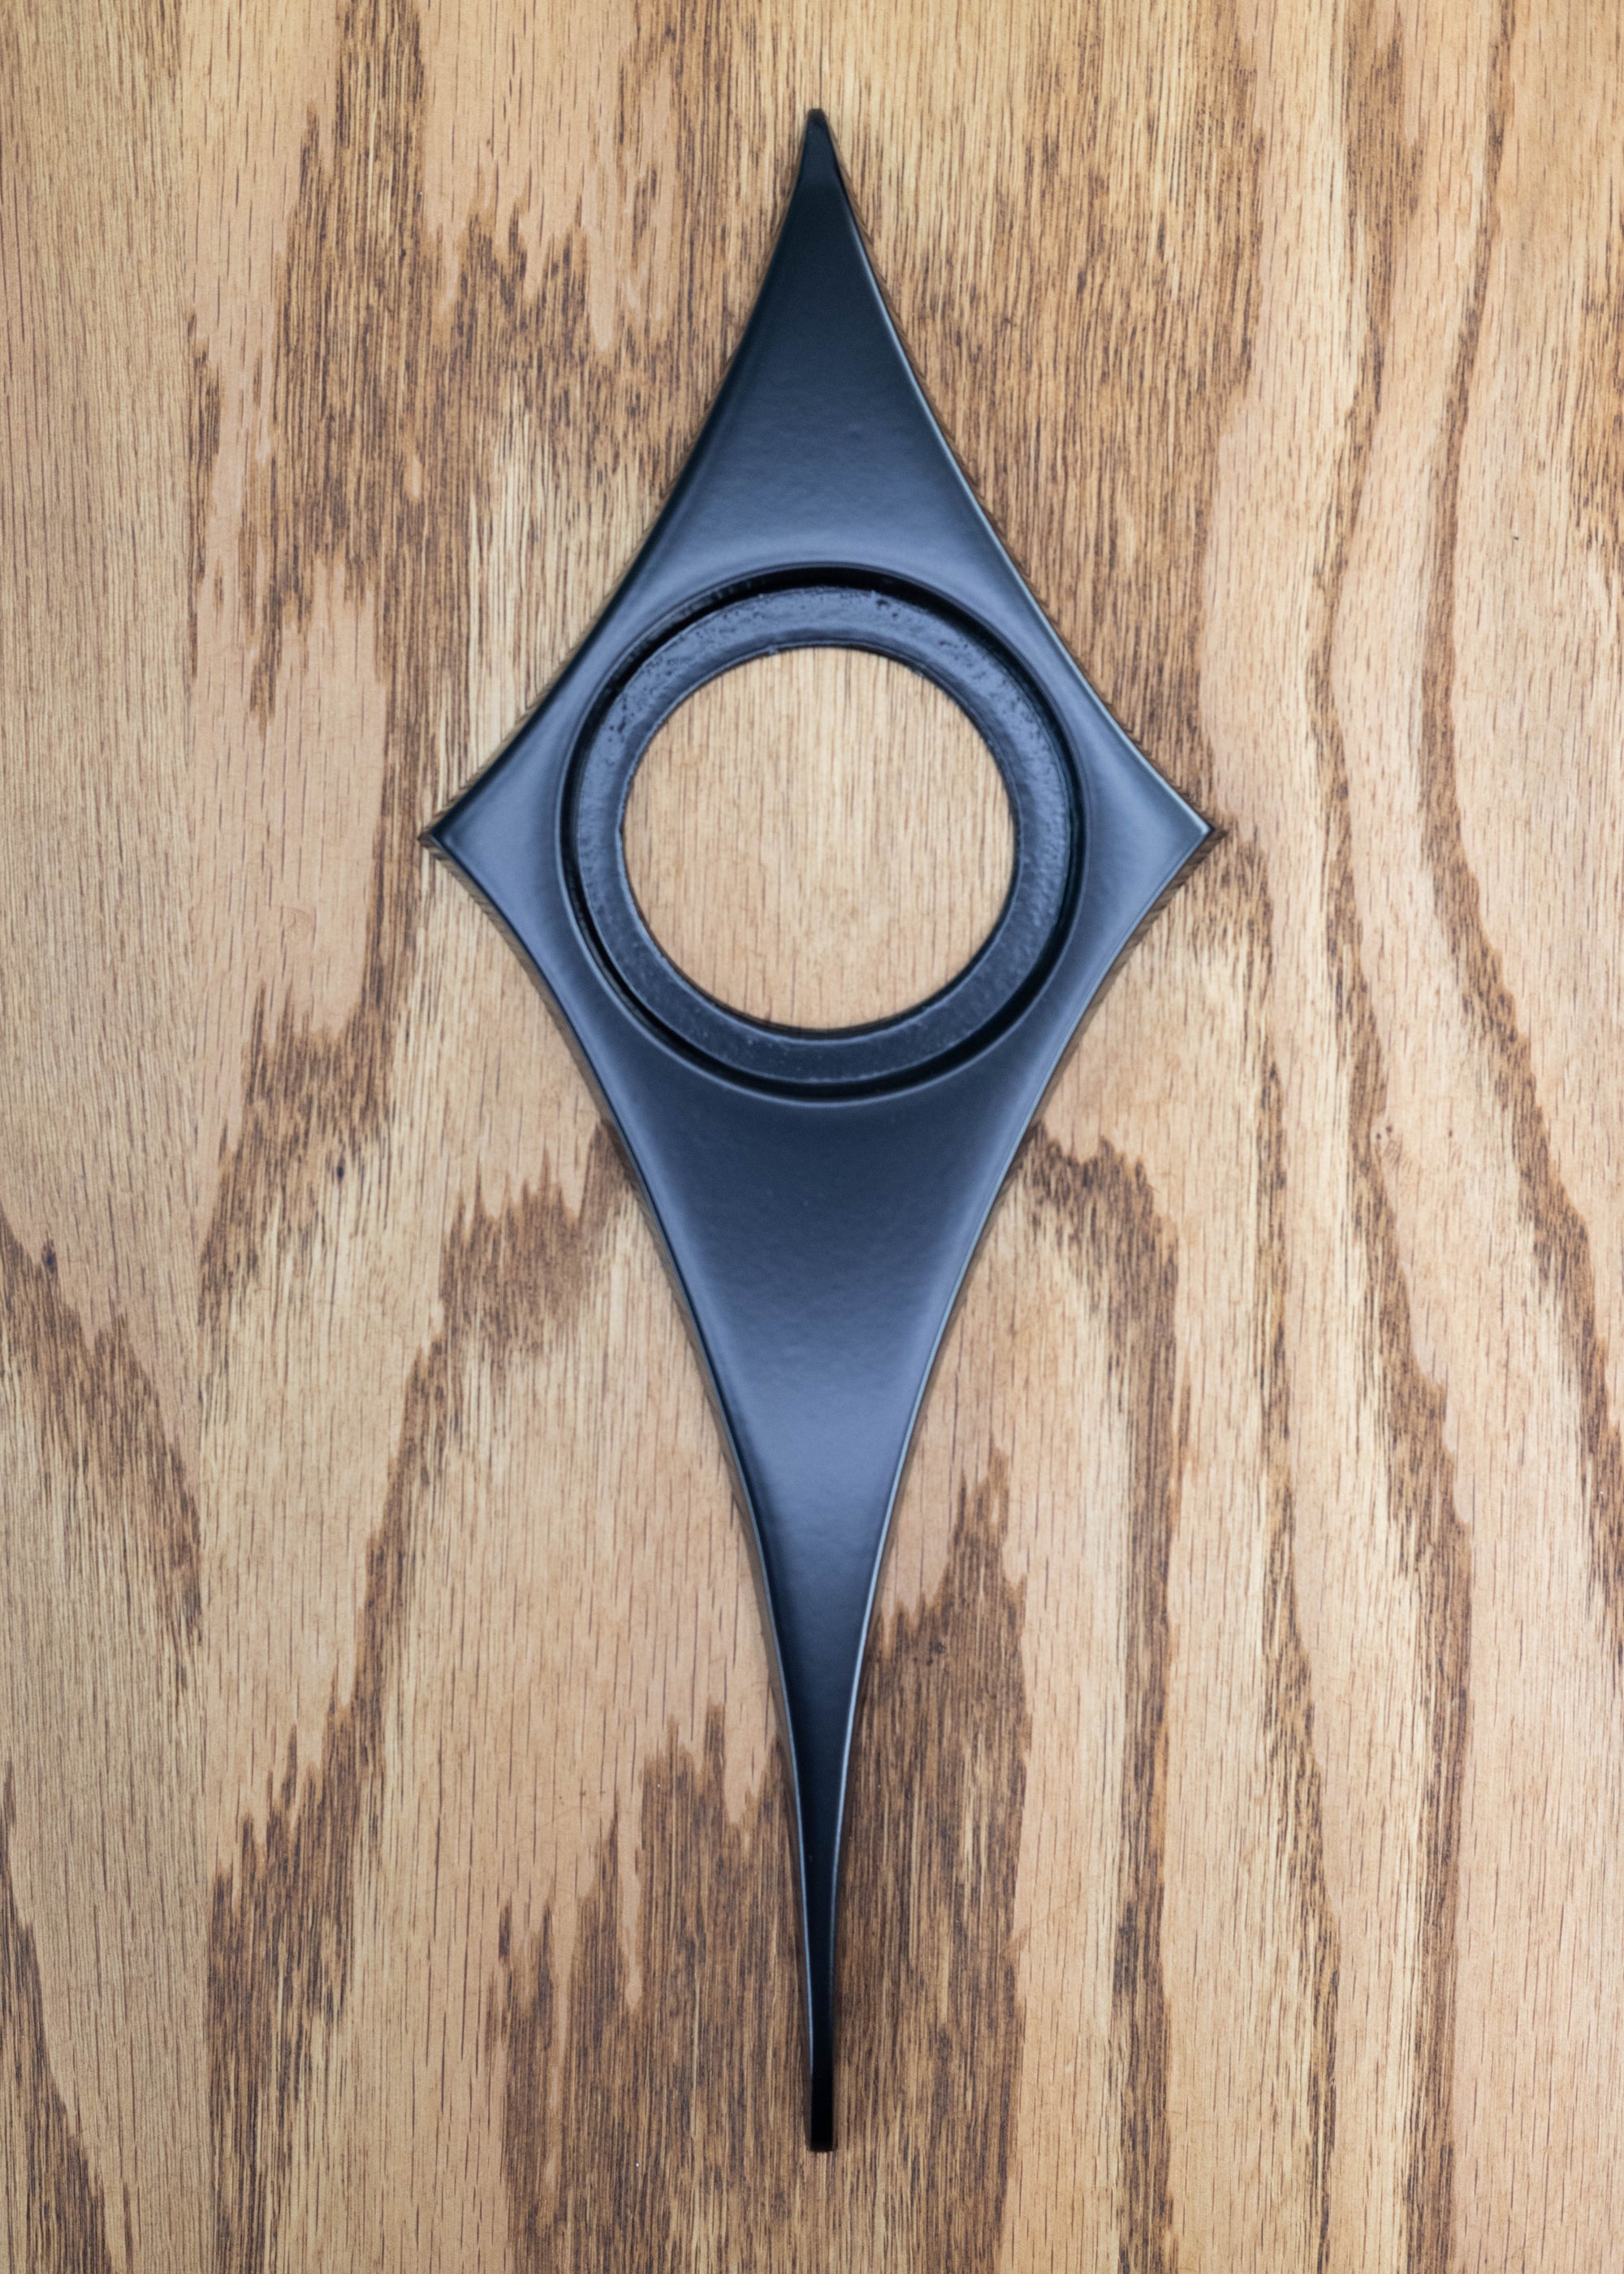 Matte black powder coated comet doorknob escutcheon. The surface is very smooth, and reflects light but is not glossy. The comet shape is like a diamond with slightly curved in edges and the bottom point is long. There is a hole in the center where the door knob goes.